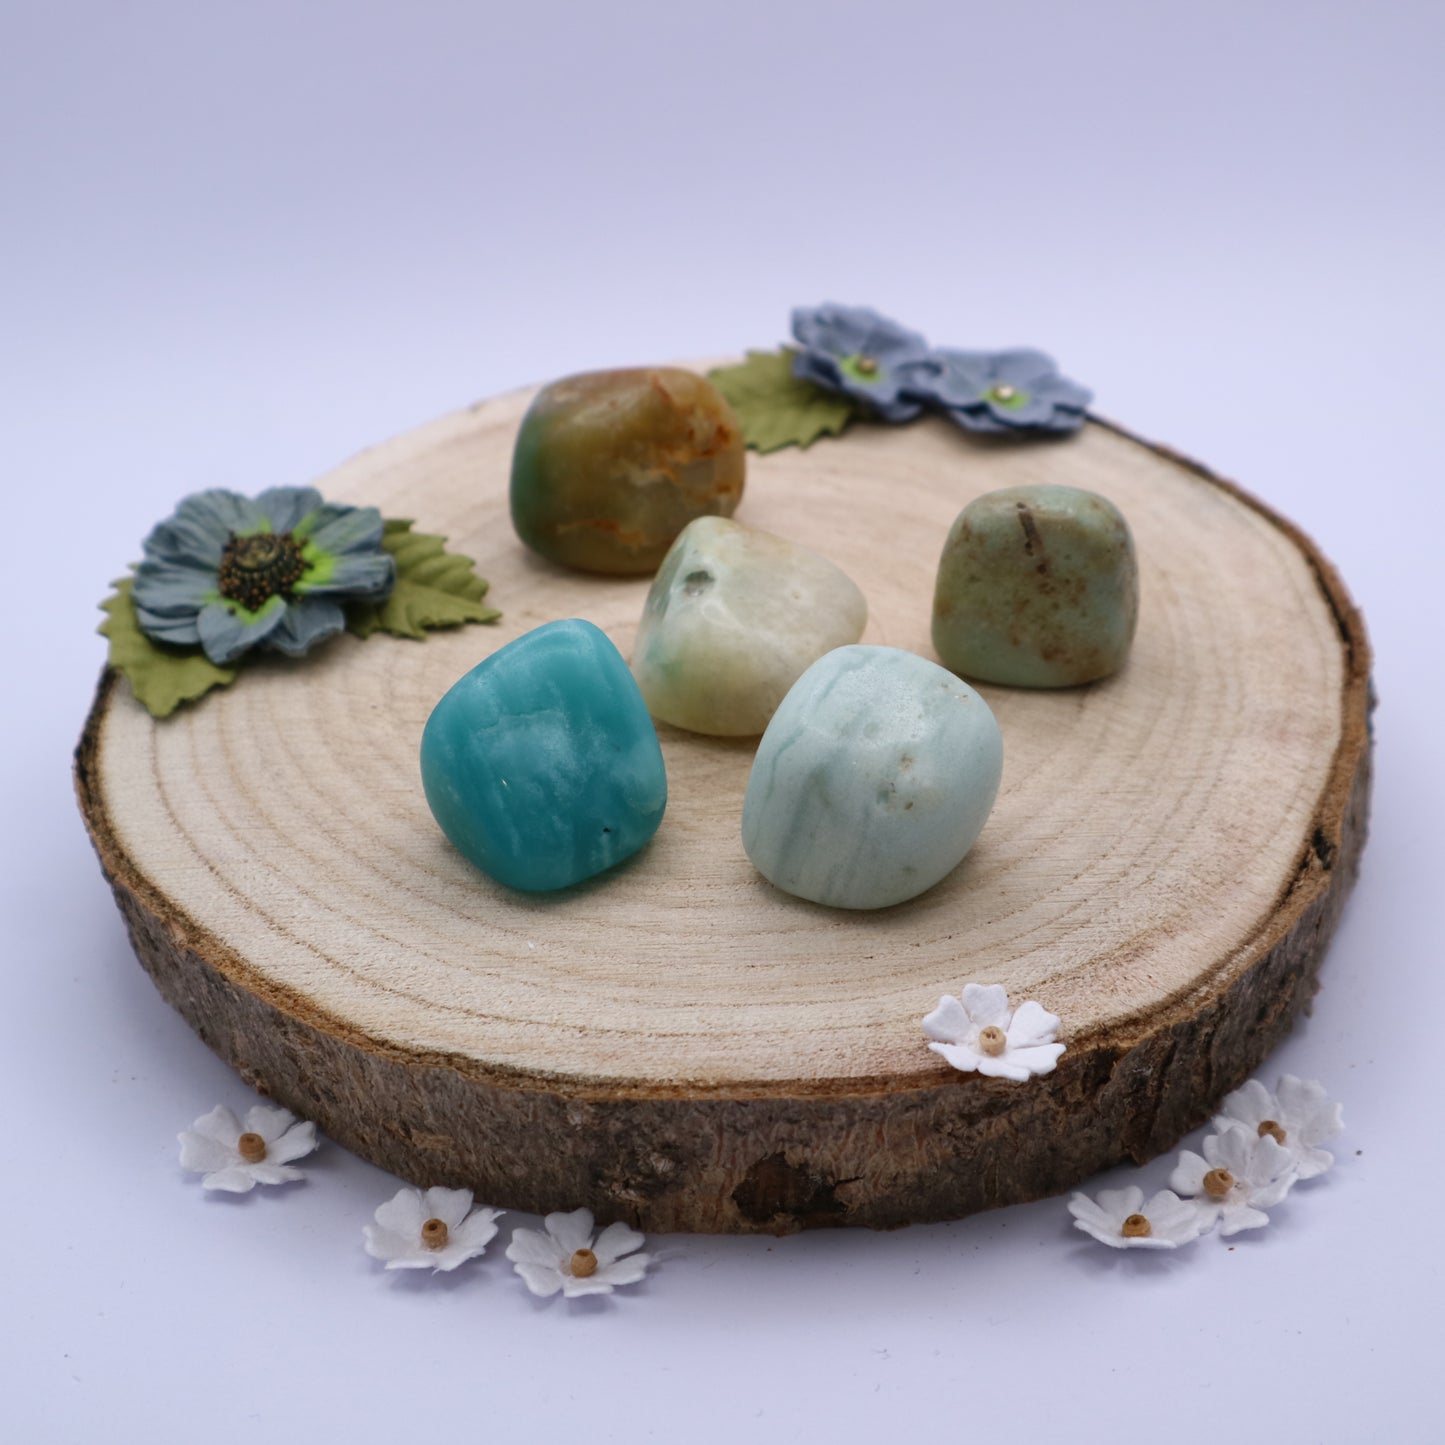 Five pieces of Amazonite crystals displayed on a piece of wood surrounded by flowers